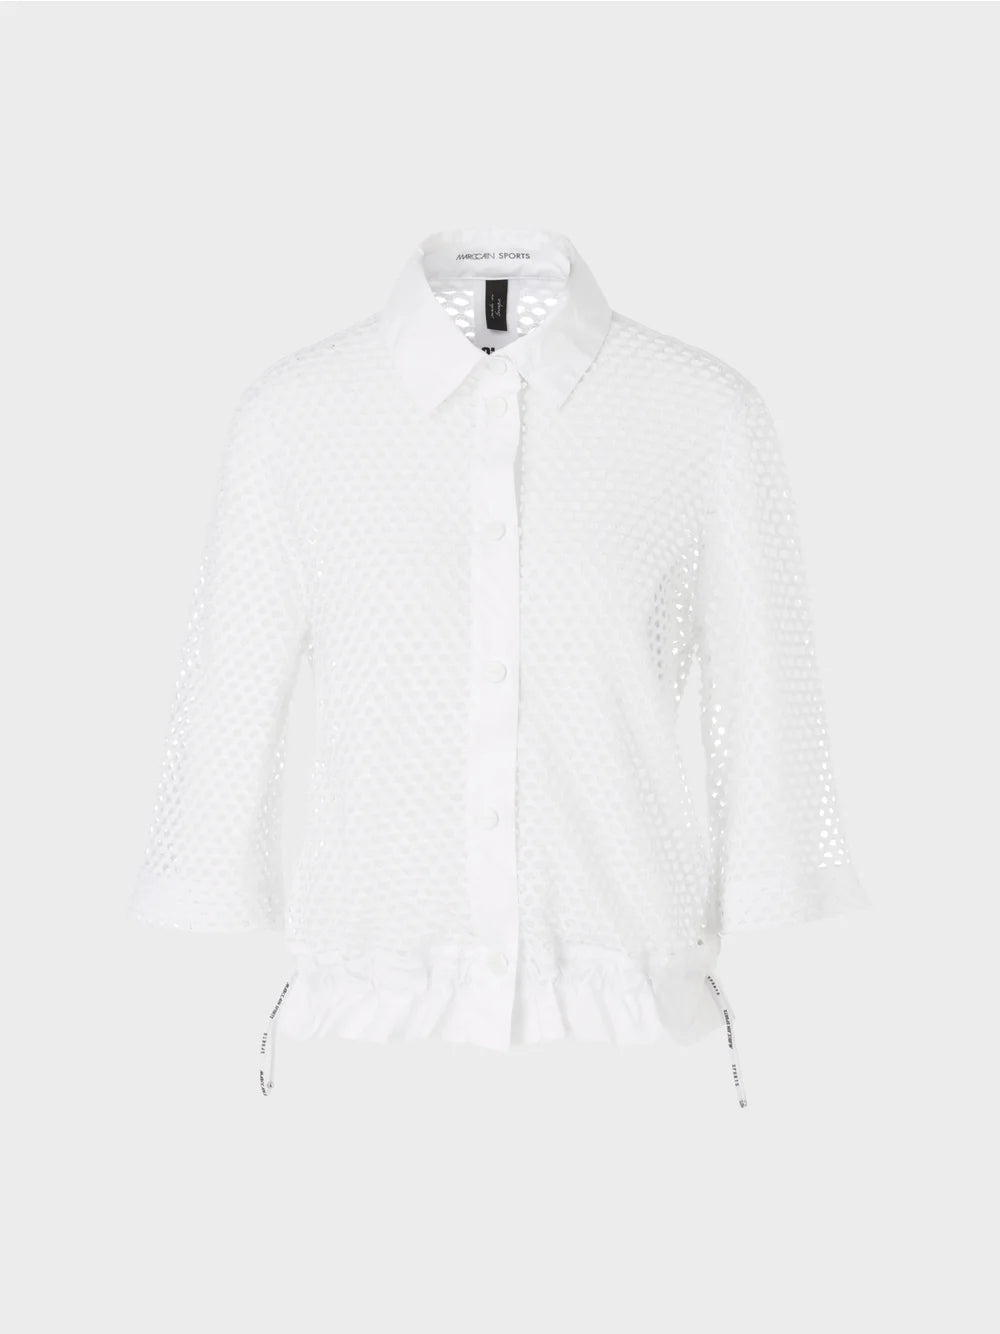 Marc Cain White Airy mesh blouse